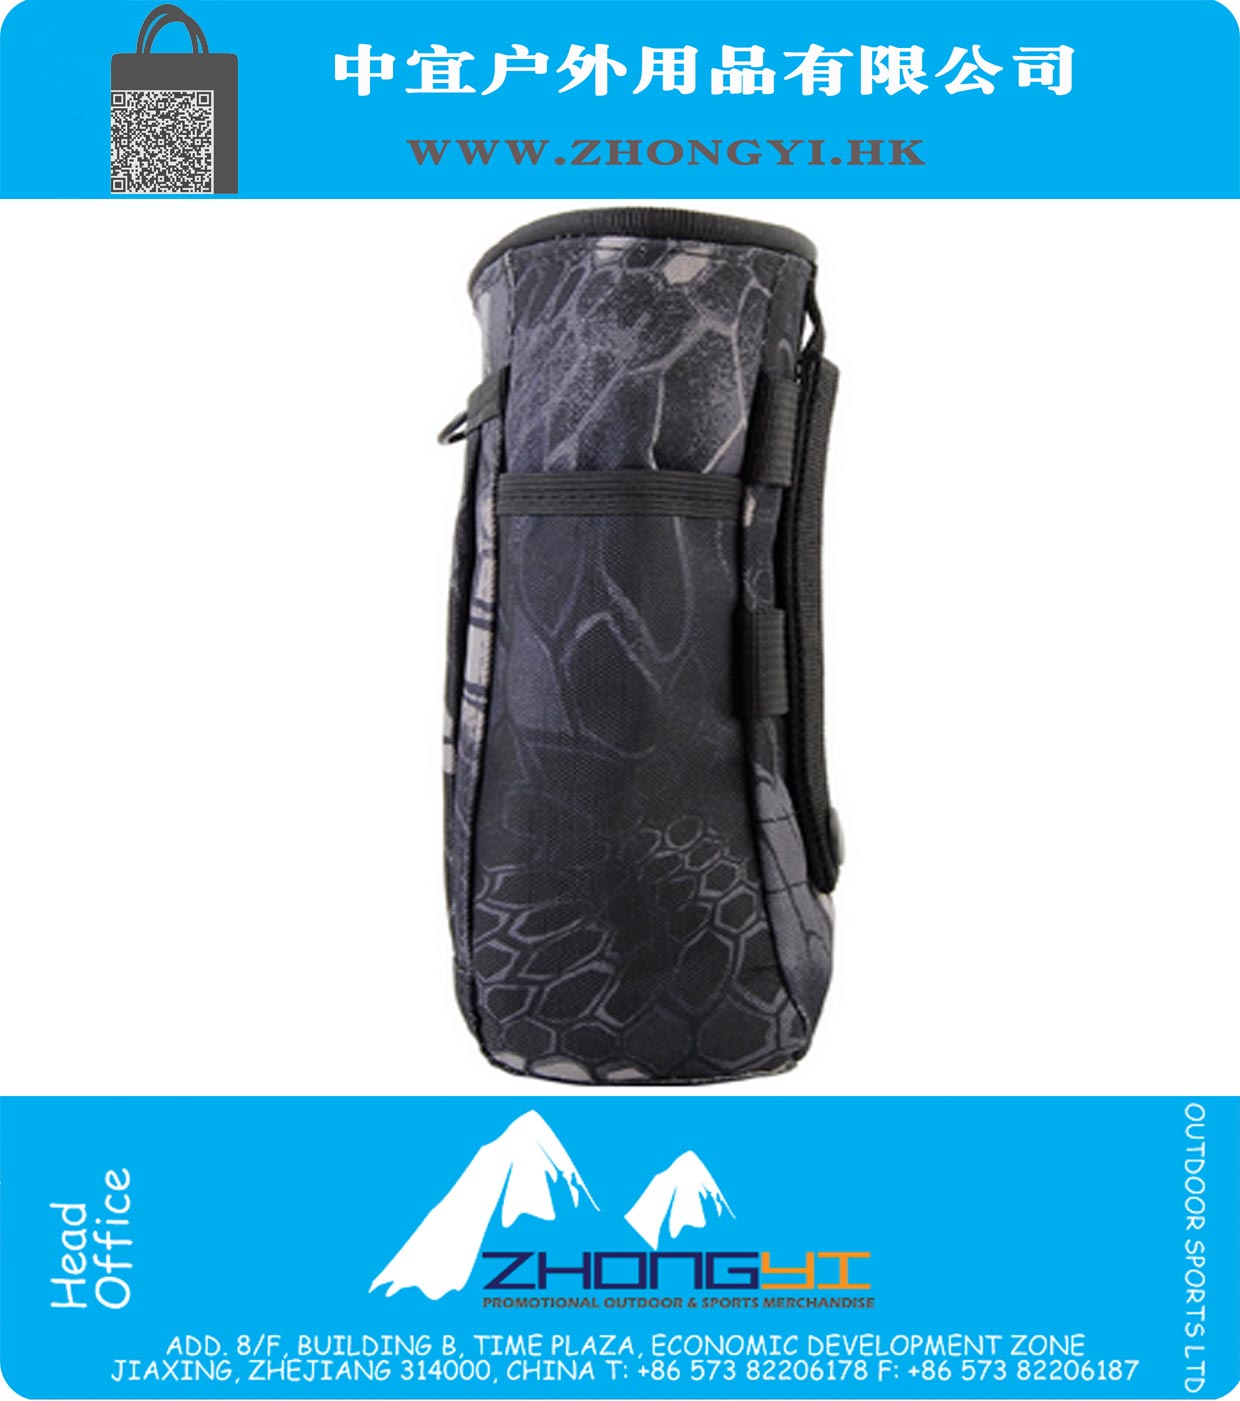 Recovery Pouch Outdoor Magazine Pouches